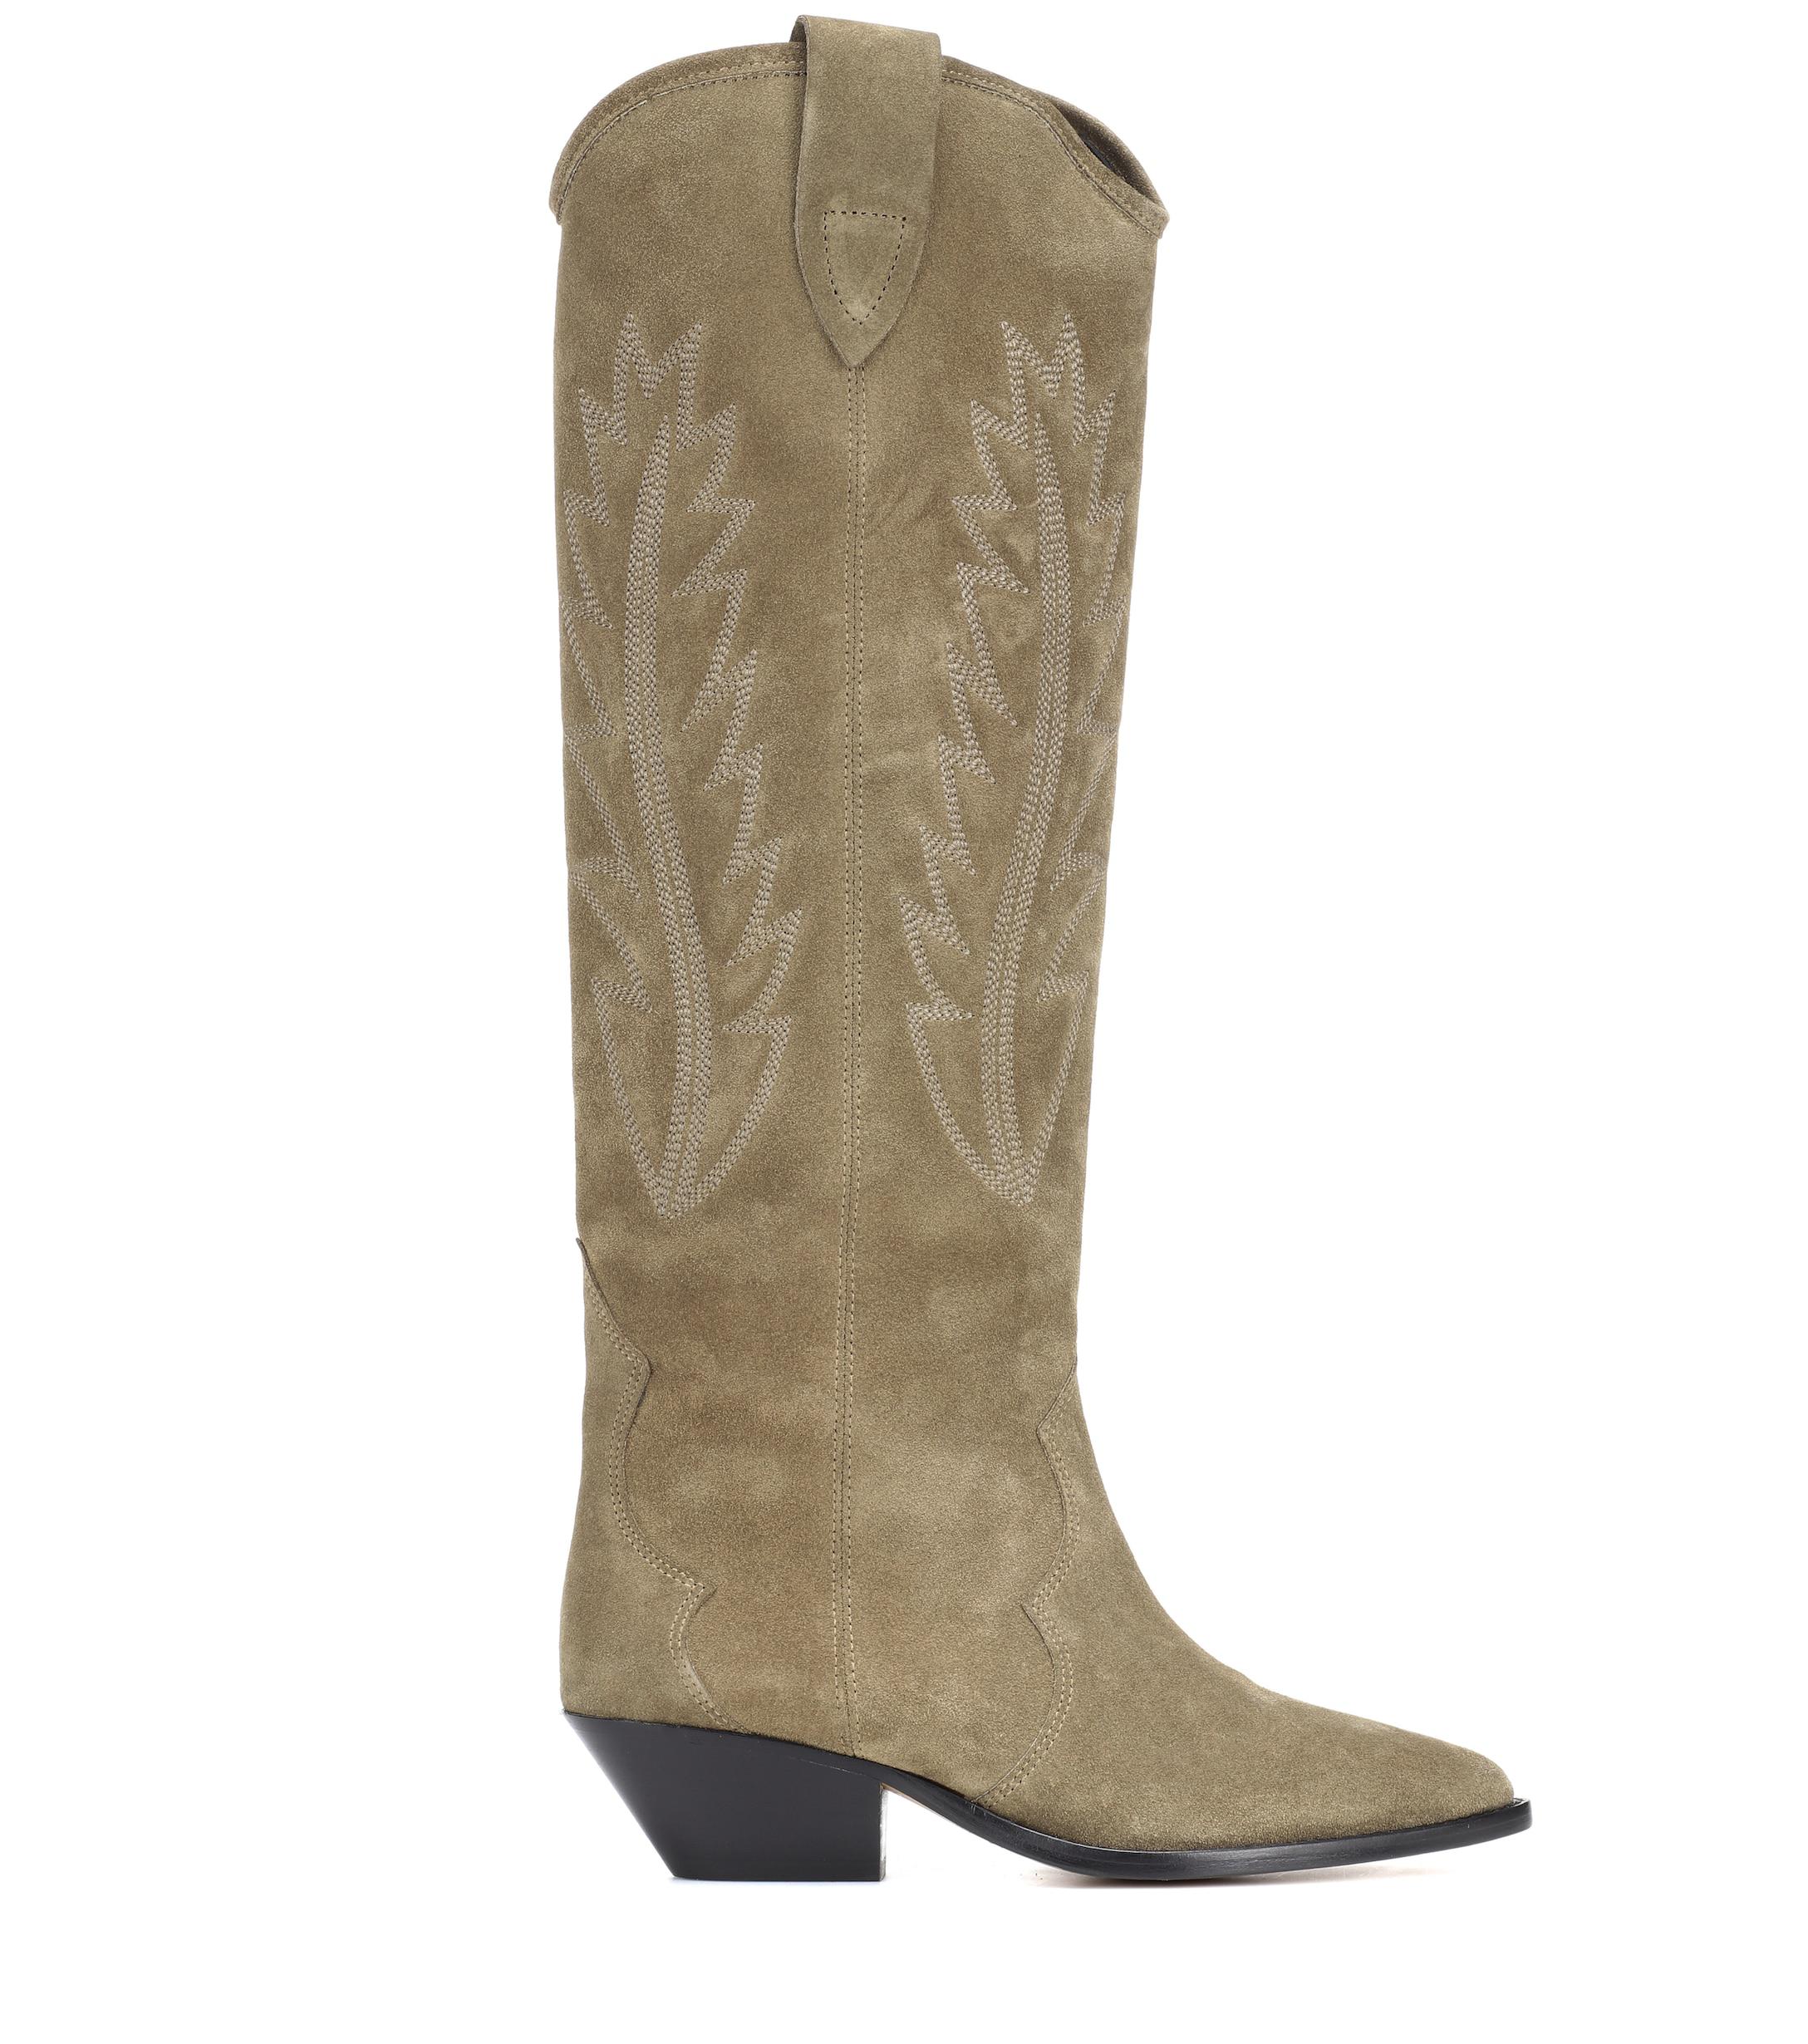 Isabel Marant Denzy Suede Cowboy Boots in Beige (Natural) - Lyst